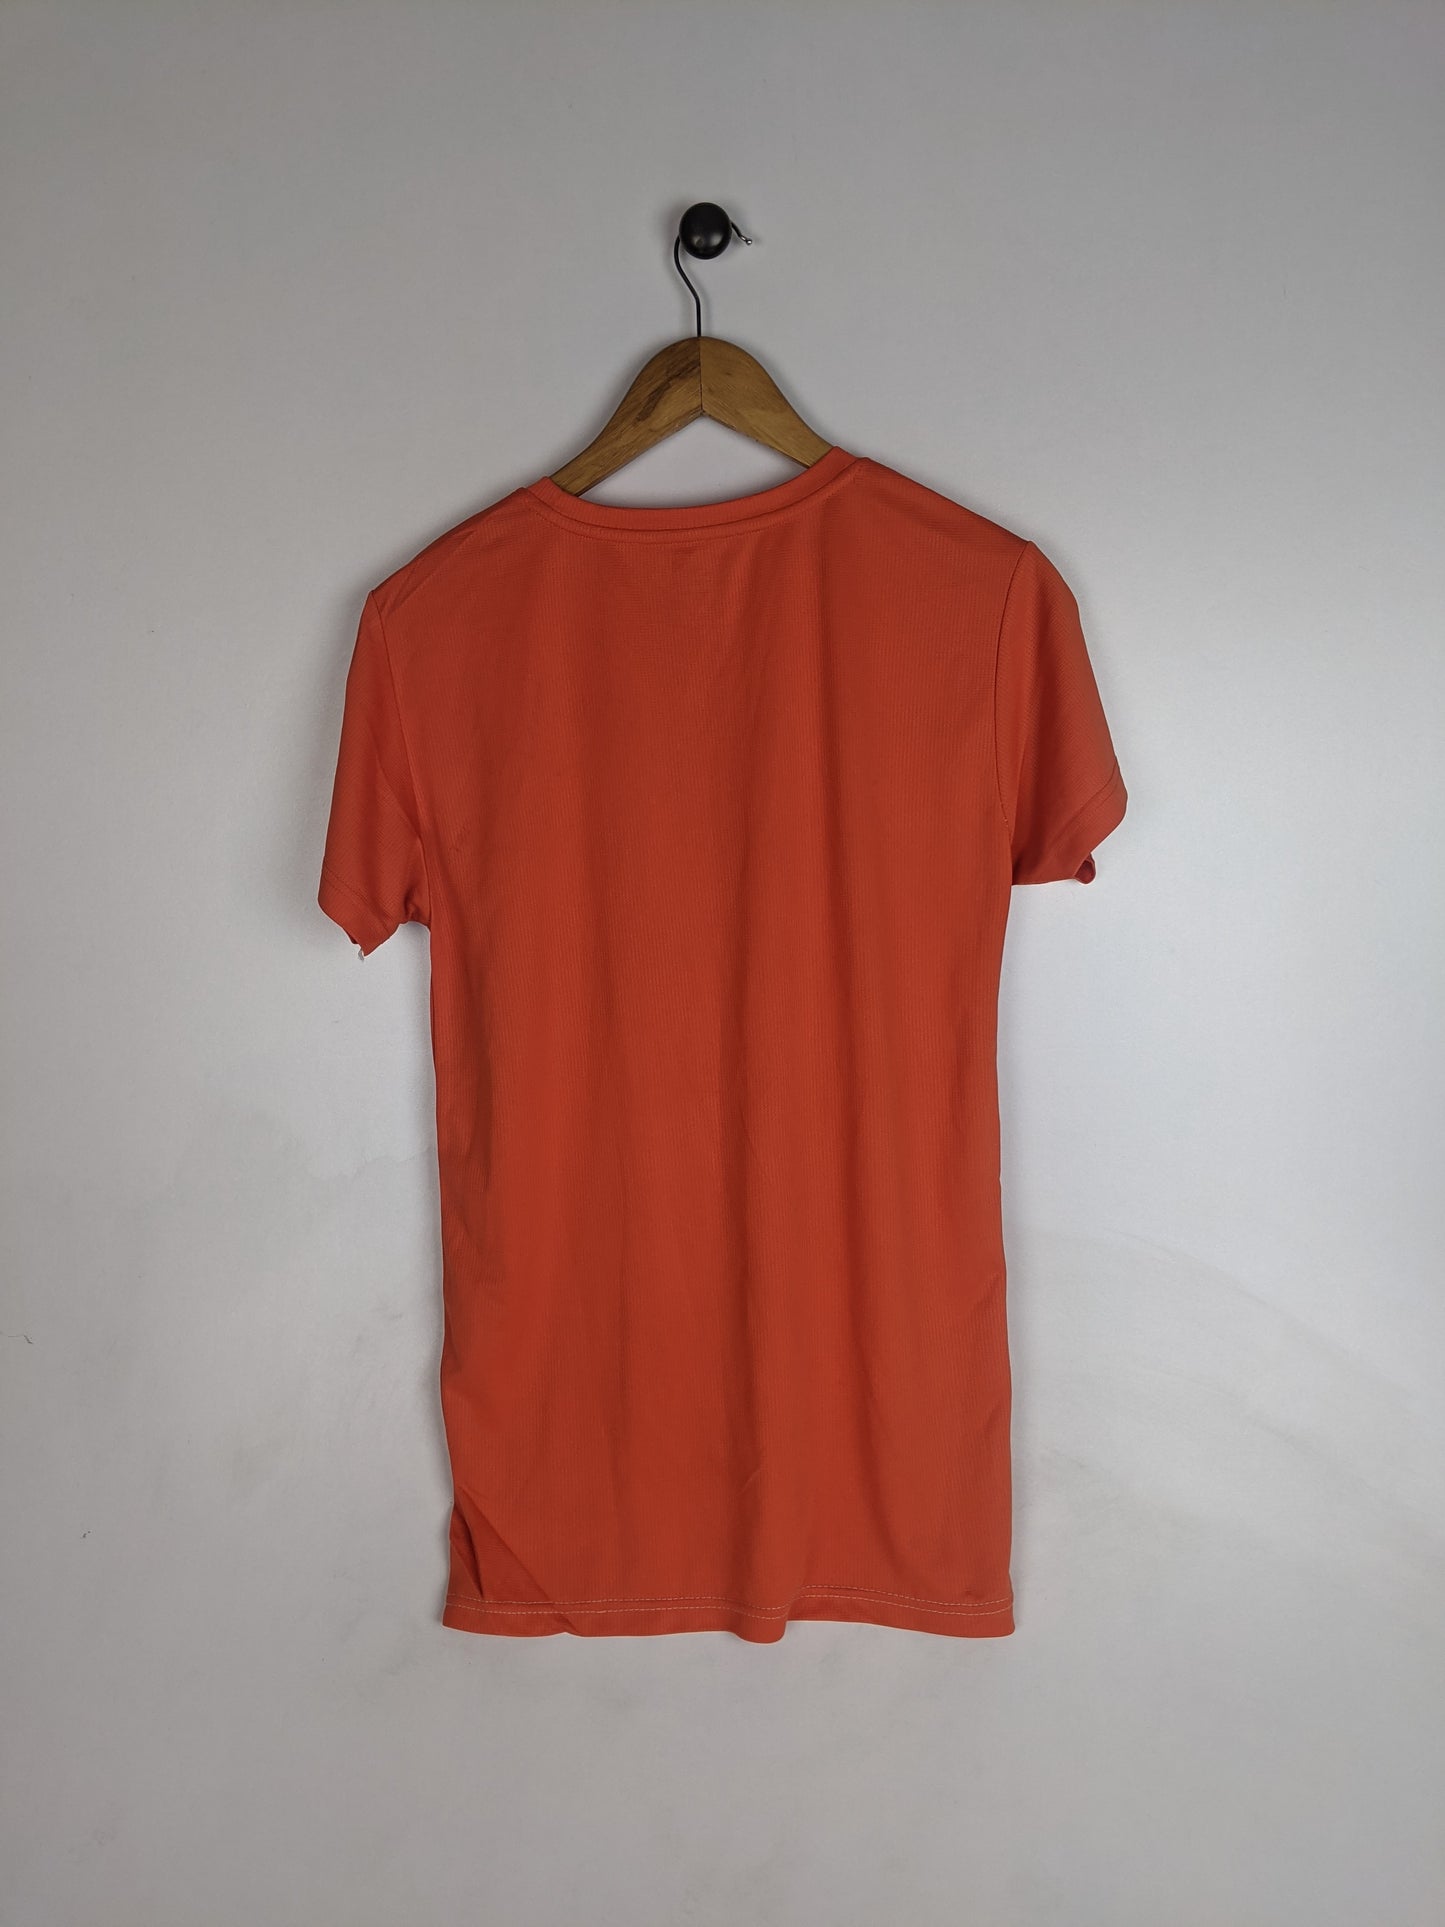 Athletic Work Core Quick Dry Short Sleeve T-Shirt Salmon